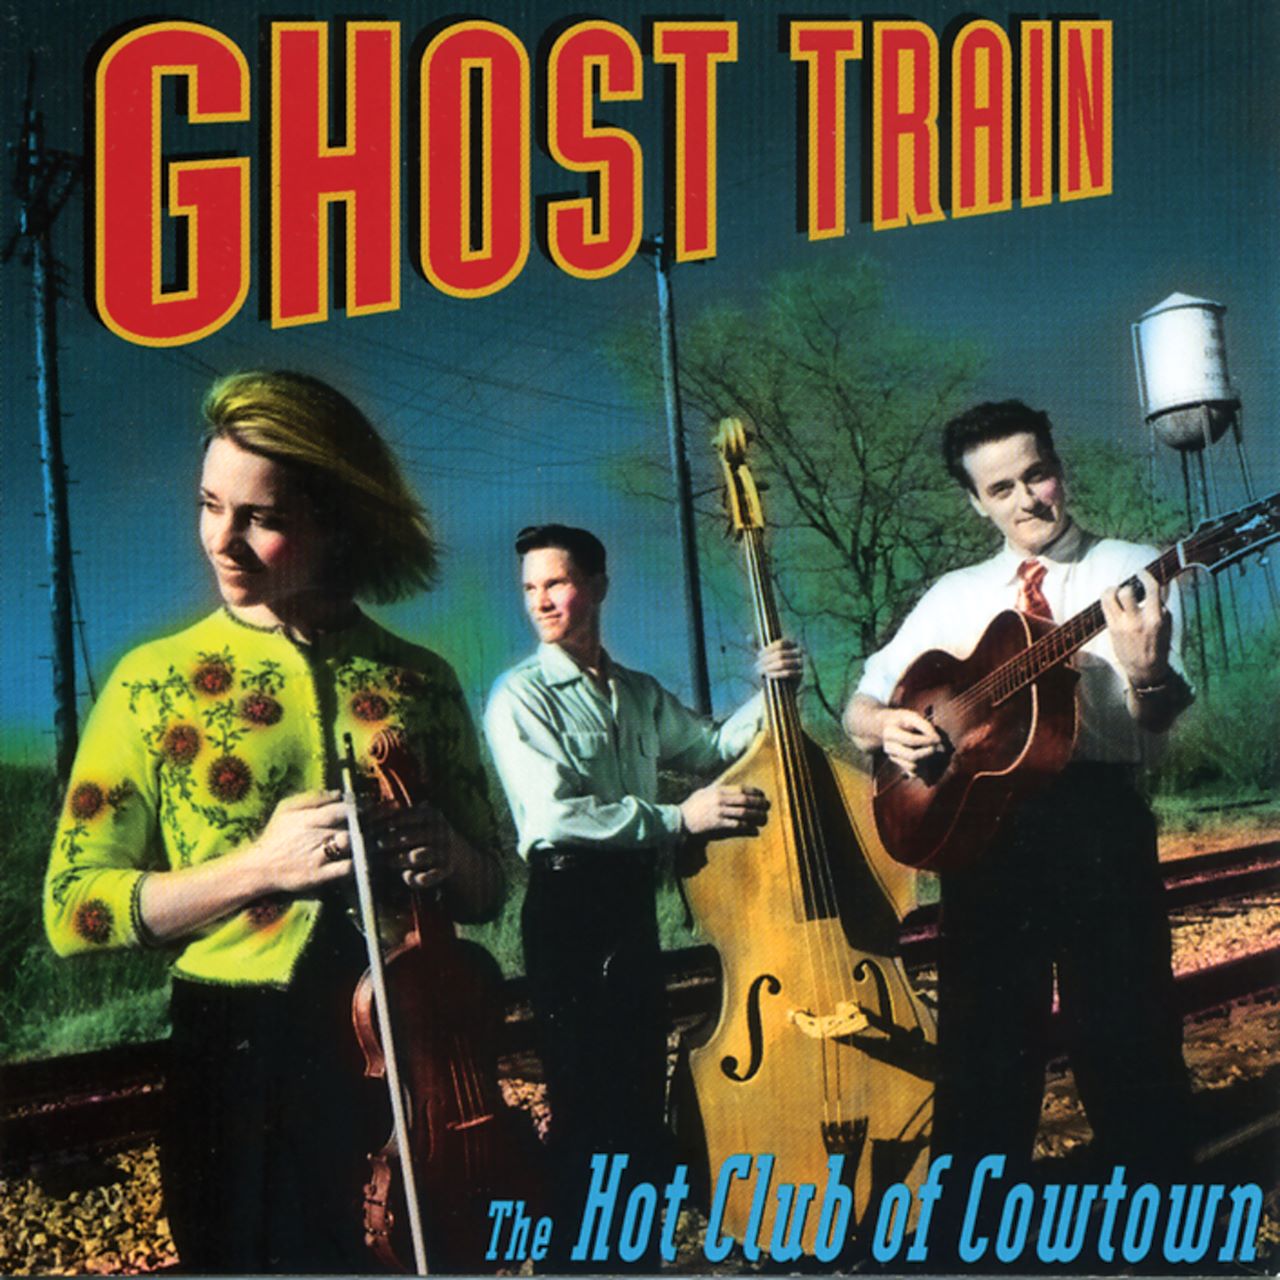 Hot Club Of Cowtown - Ghost Train cover album